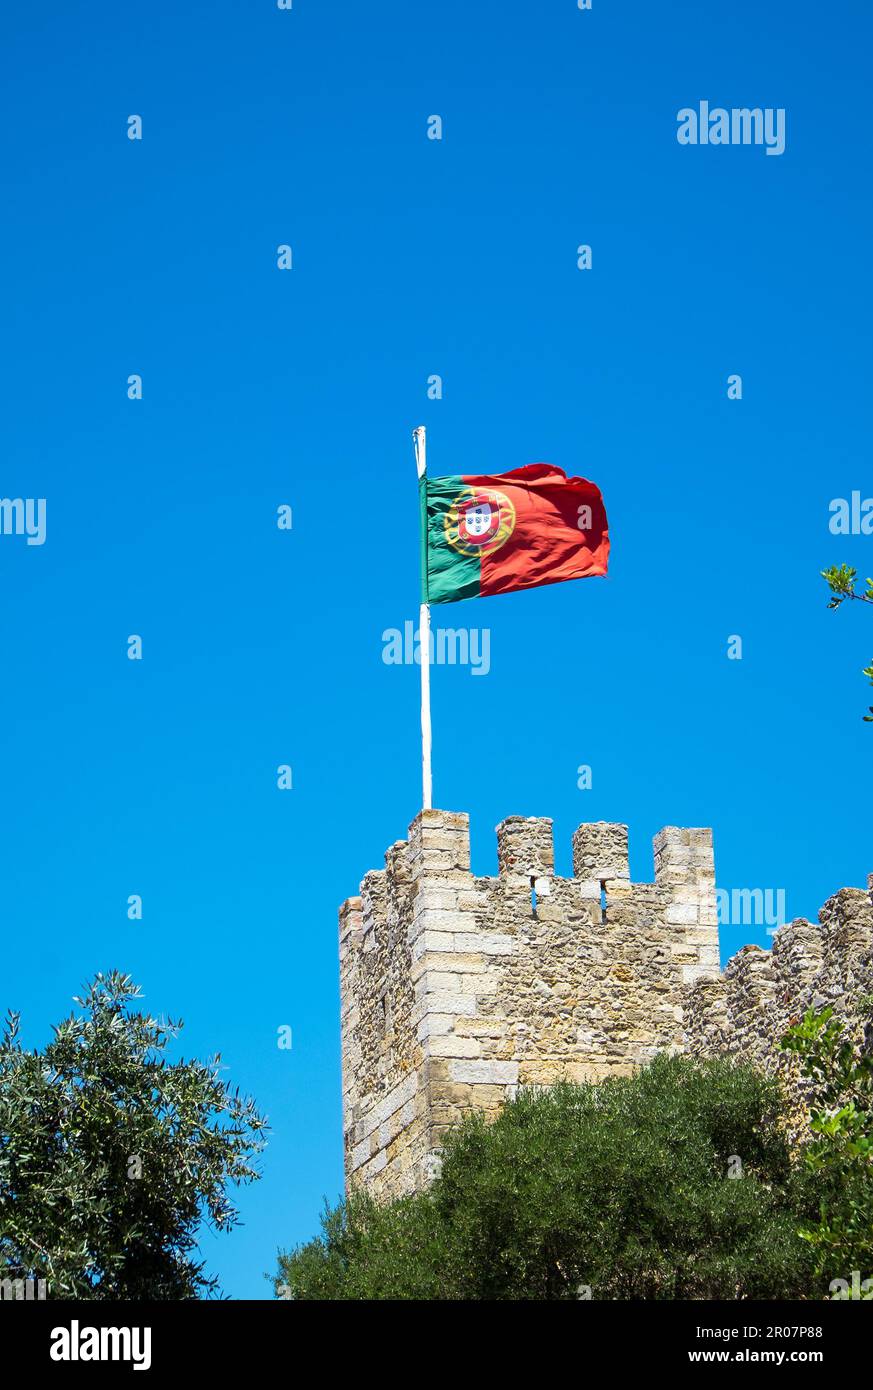 The Portuguese flag whet on an old castle Stock Photo